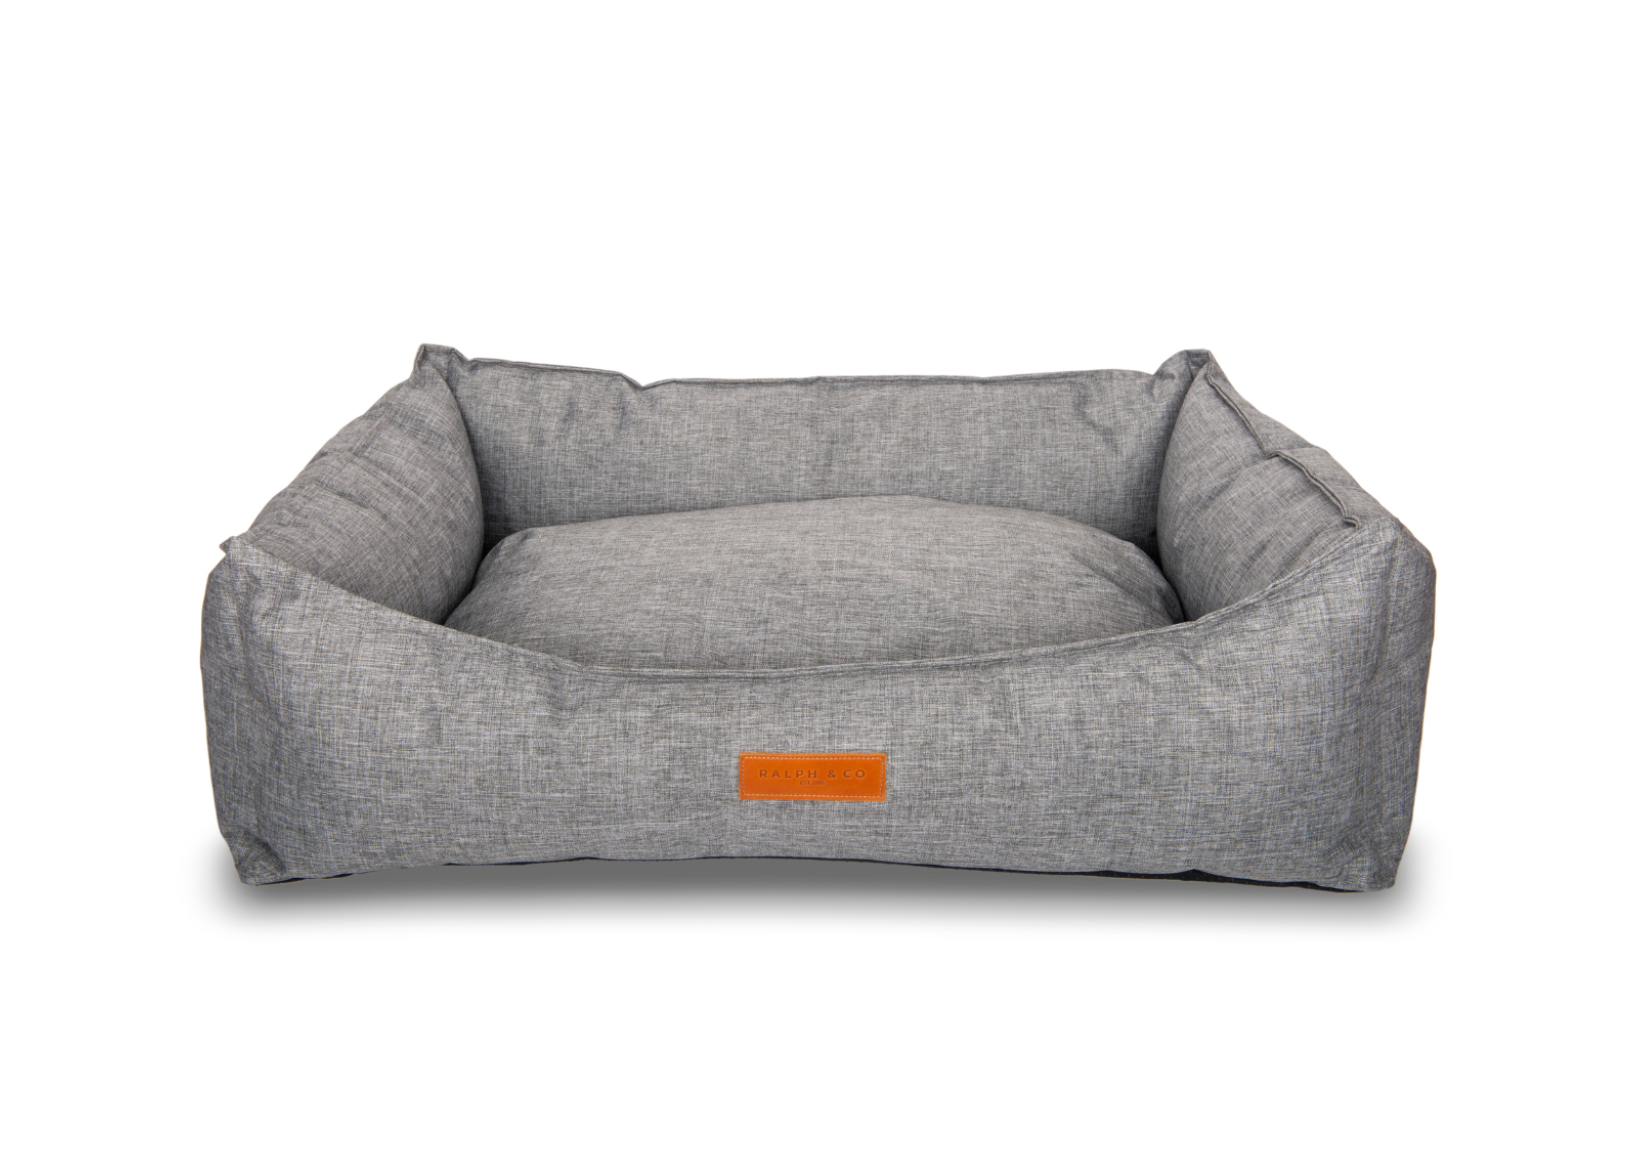 Product shot featuring the Windsor grey waterproof nest bed